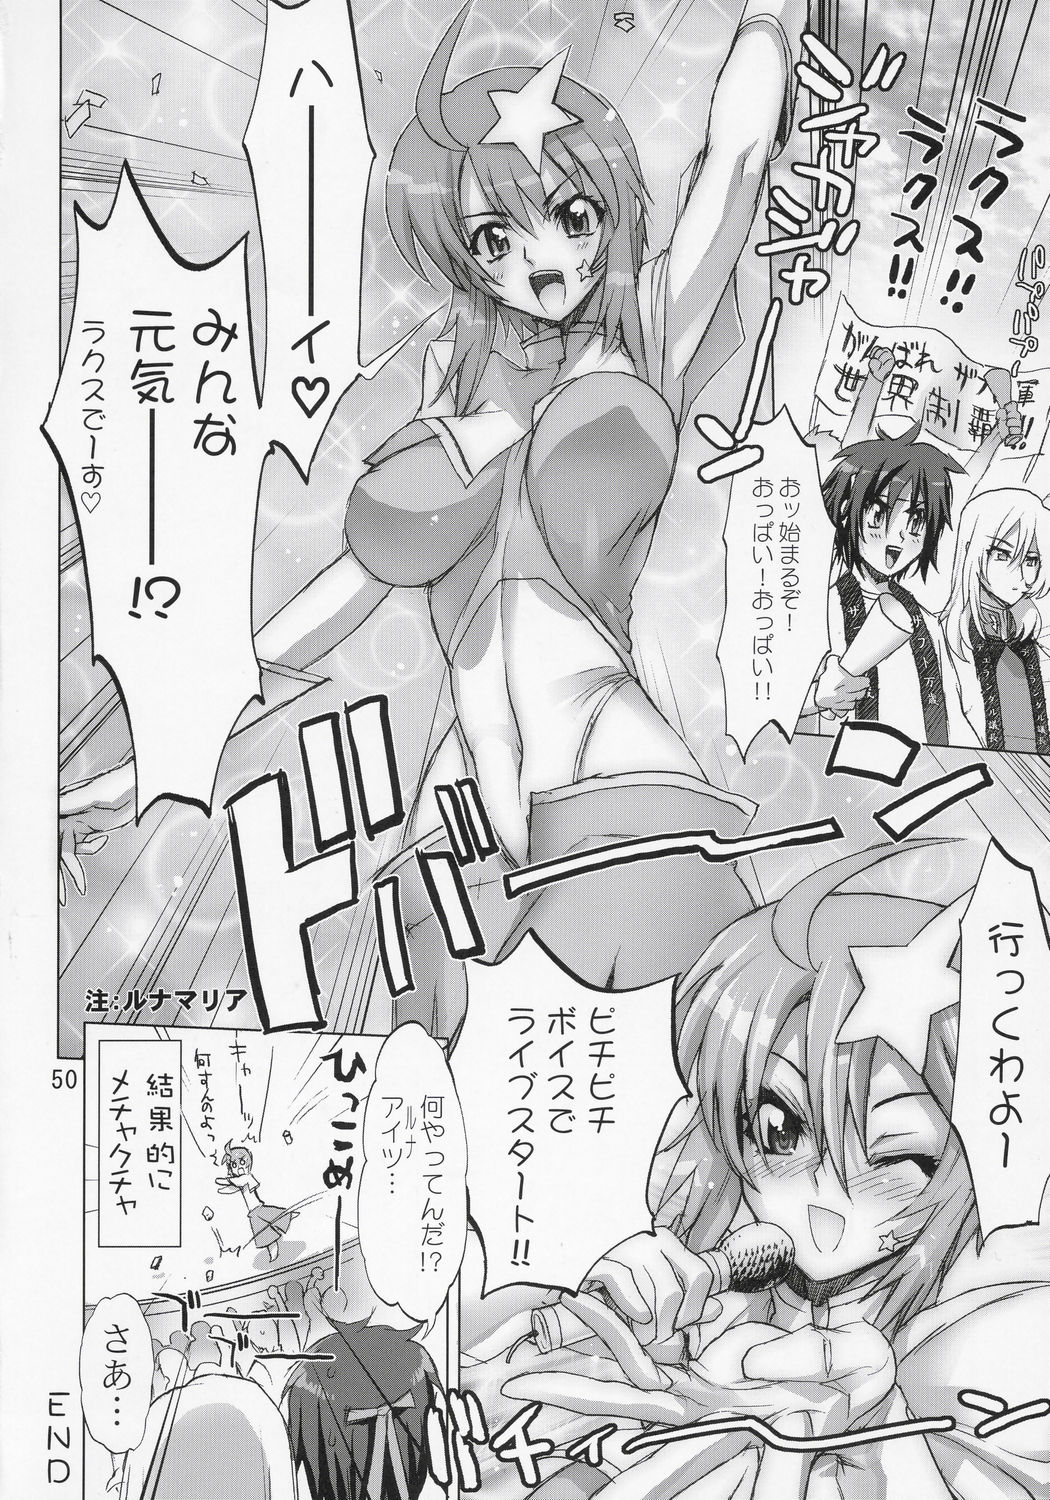 (C69) [Digital Accel Works] Inazuma Warrior 2 (Various) page 49 full